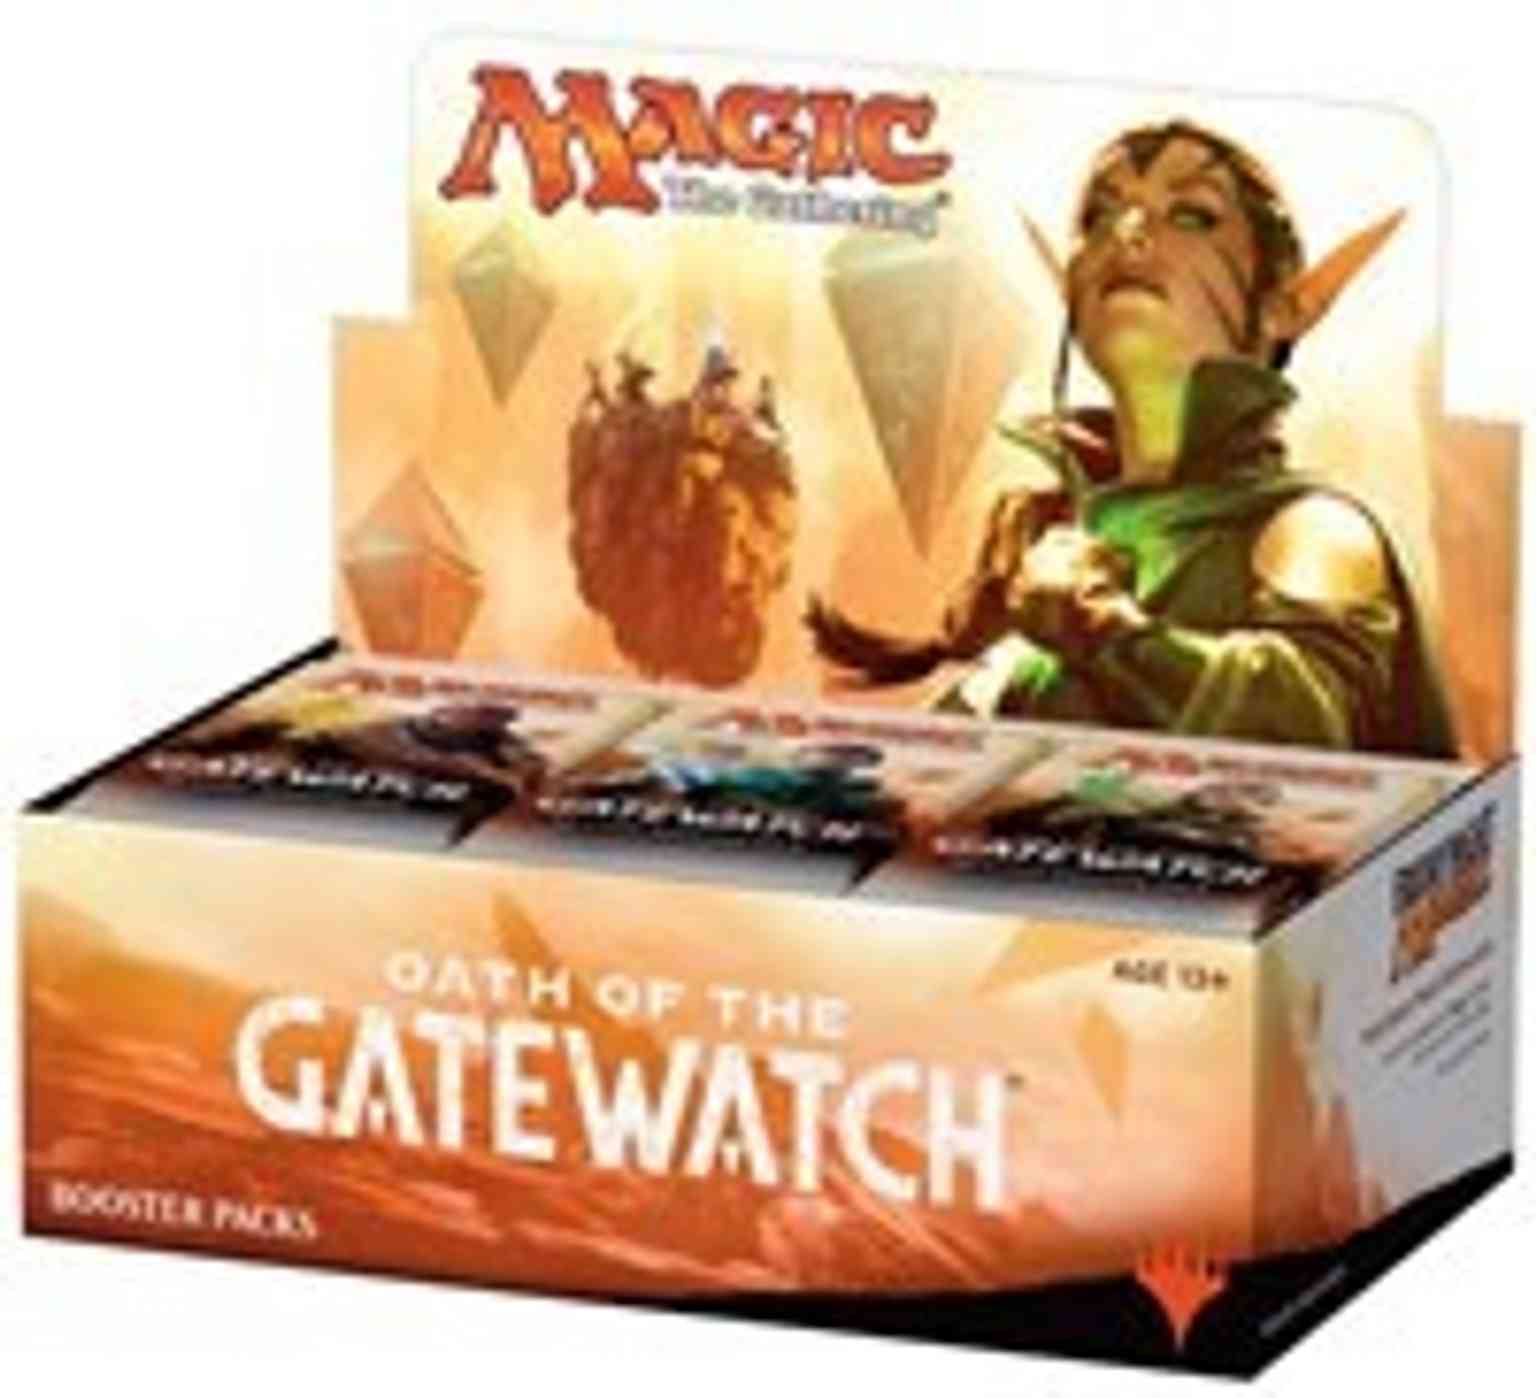 Oath of the Gatewatch - Booster Box magic card front